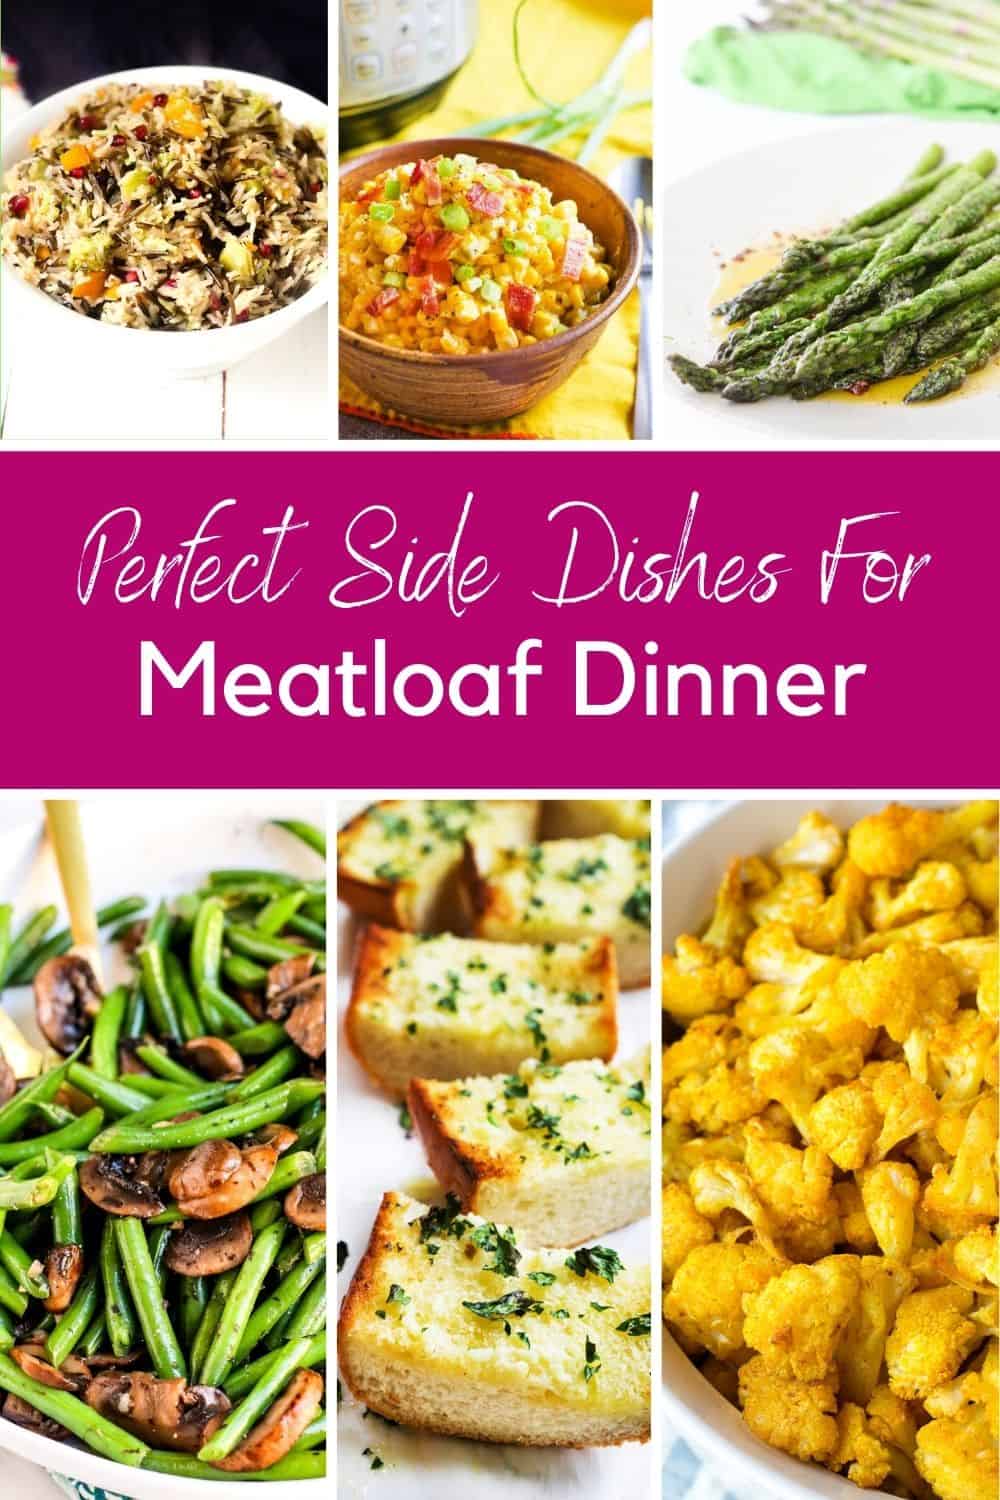 Image with 6 different recipes on it and text reading, "Perfect side dishes for meatloaf dinner."